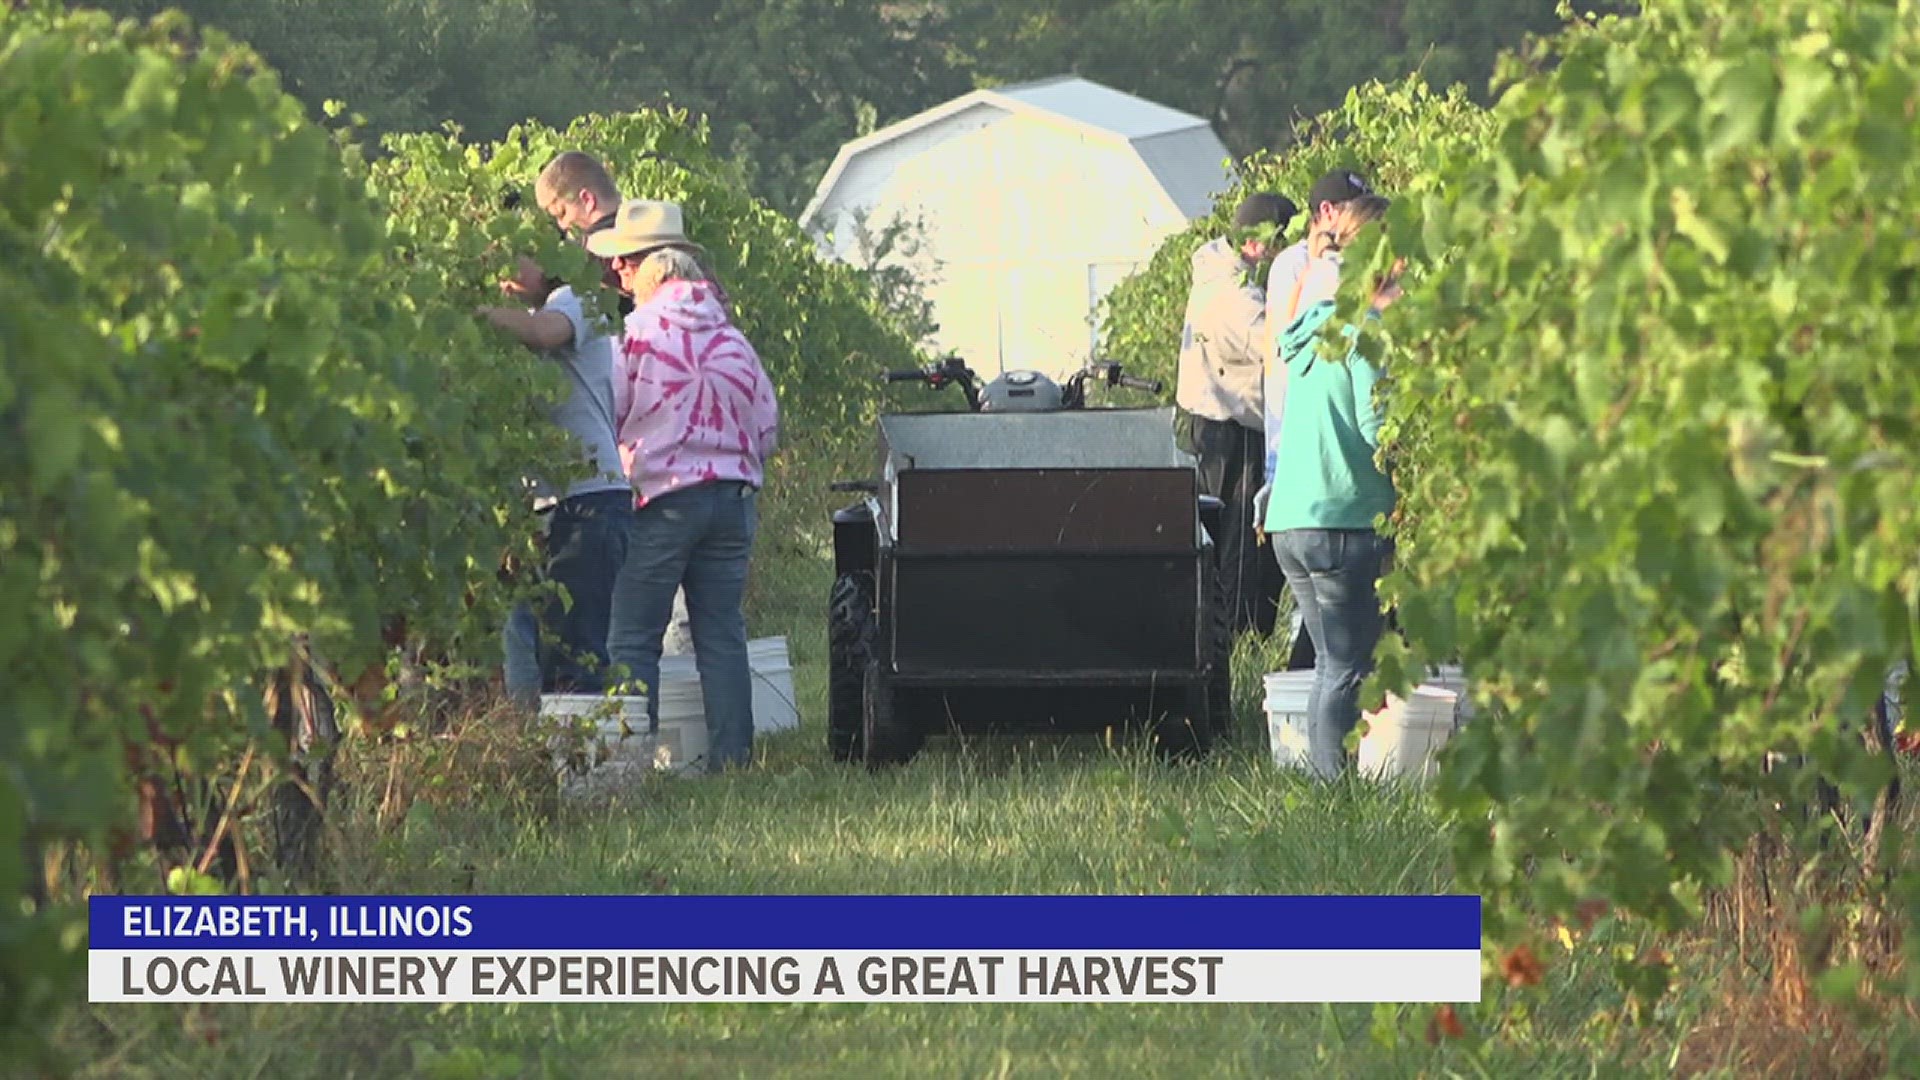 Drought throughout the region is a concern for farmers as we enter fall harvest season, but Massbach Ridge Winery in Elizabeth, Illinois is benefiting from it.